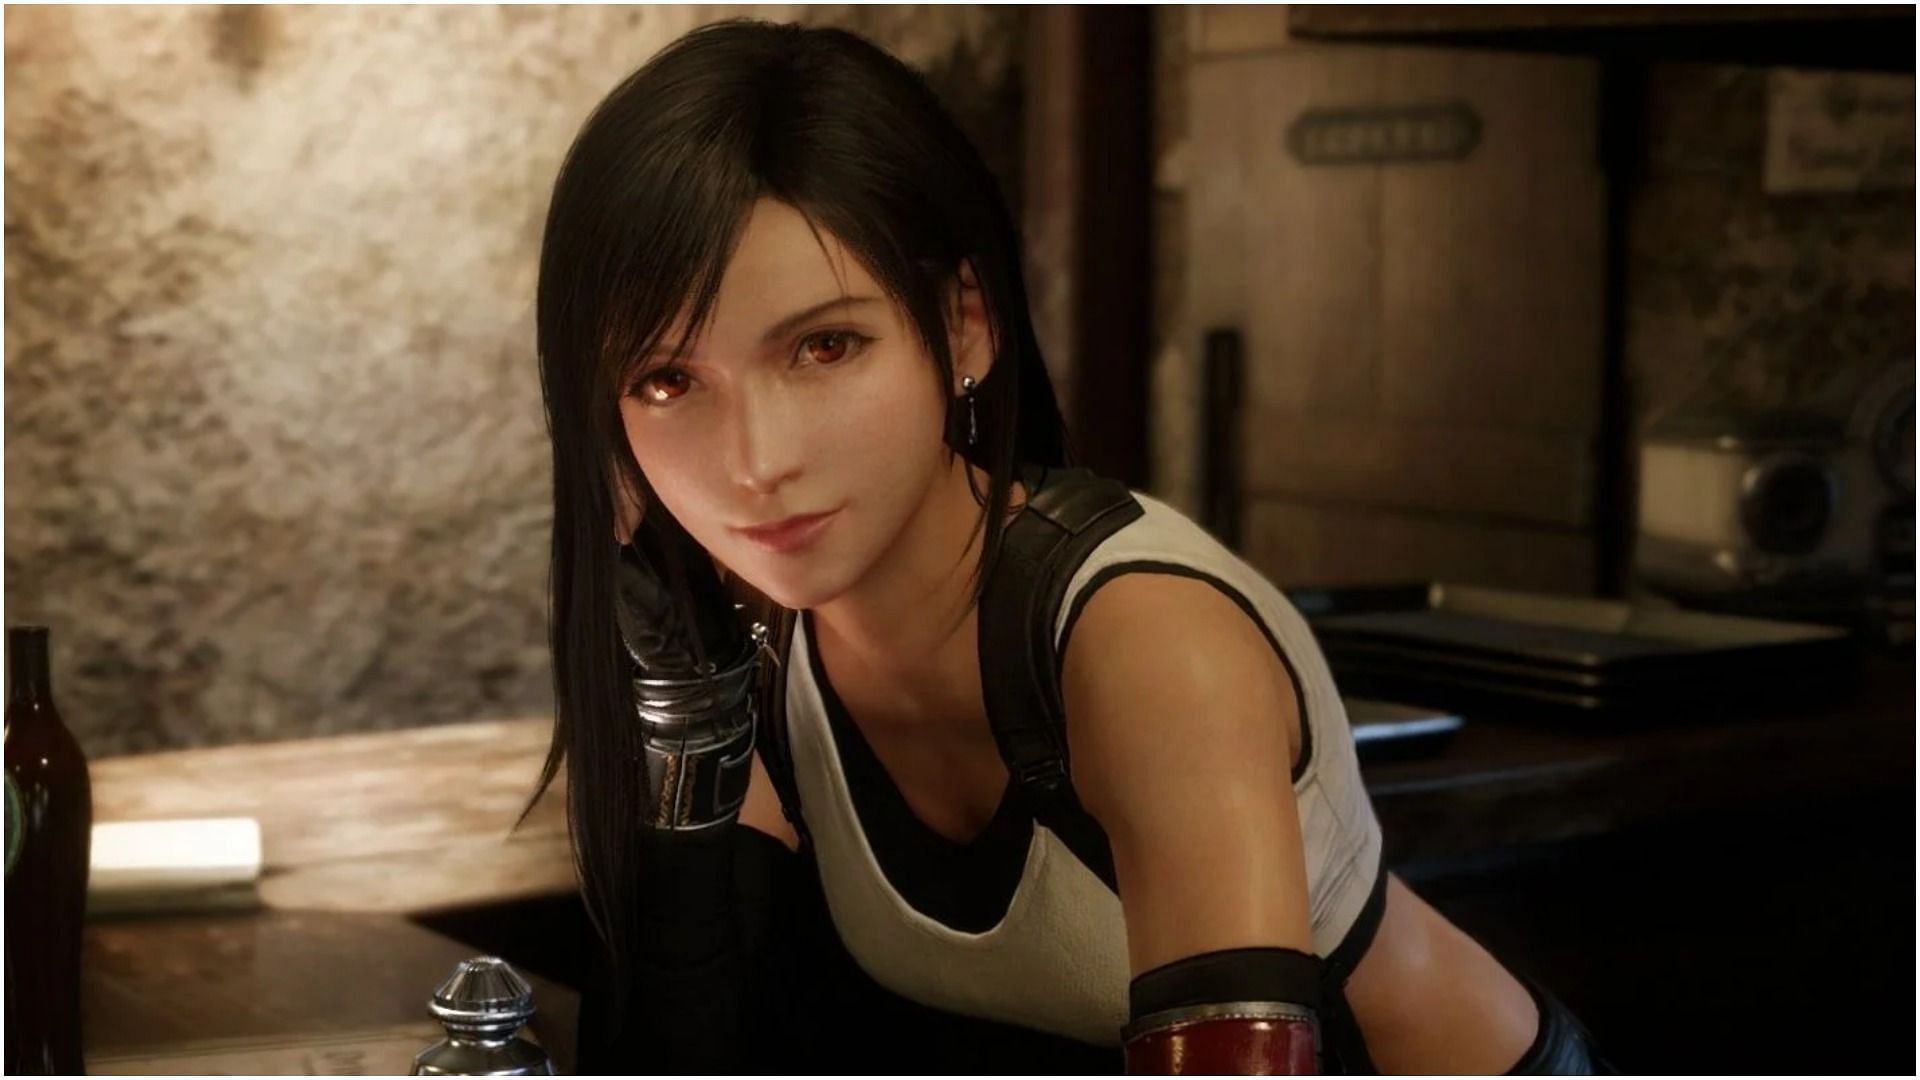 Tifa is one of the most popular female characters in games (Image via Square Enix)